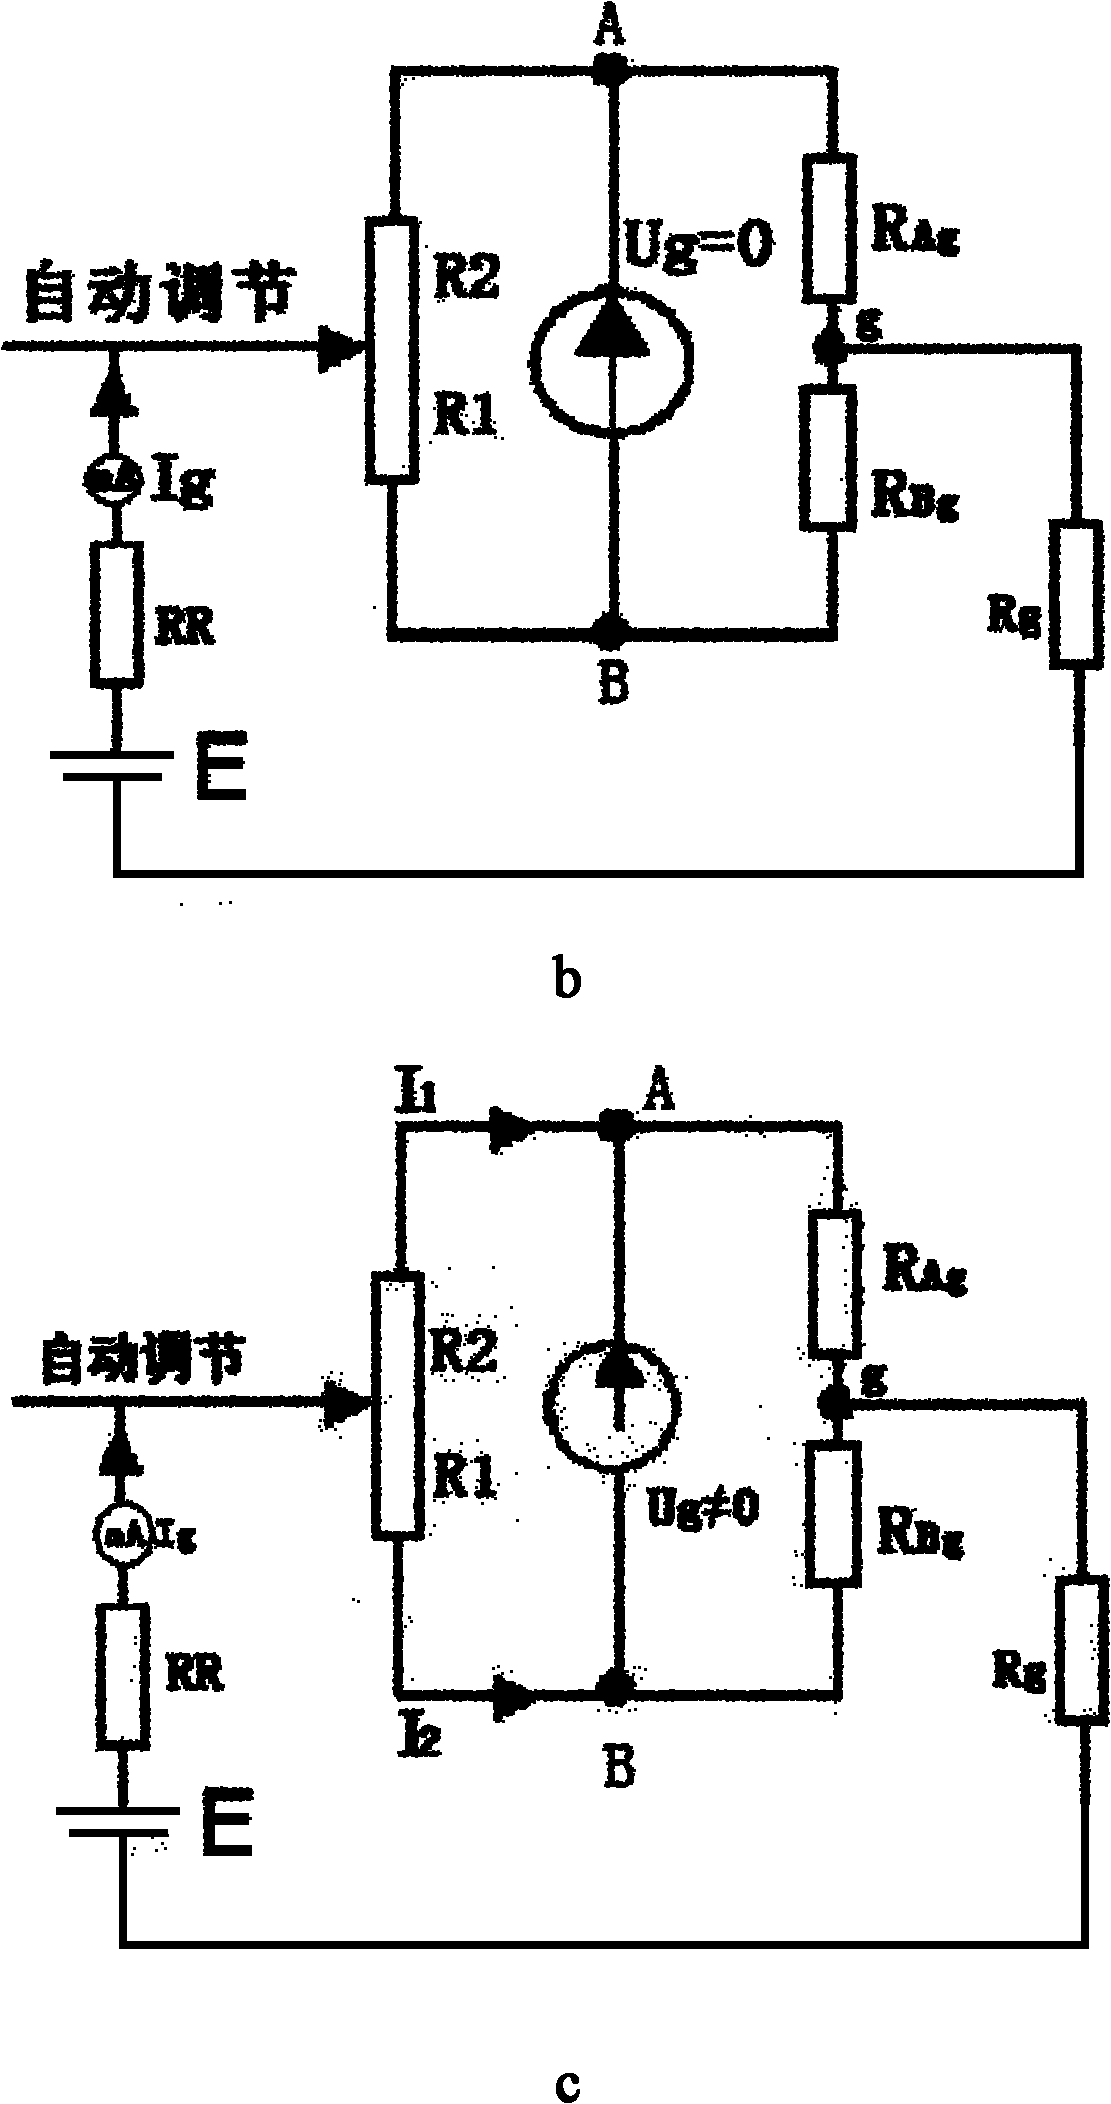 Device and method for testing power cable fault